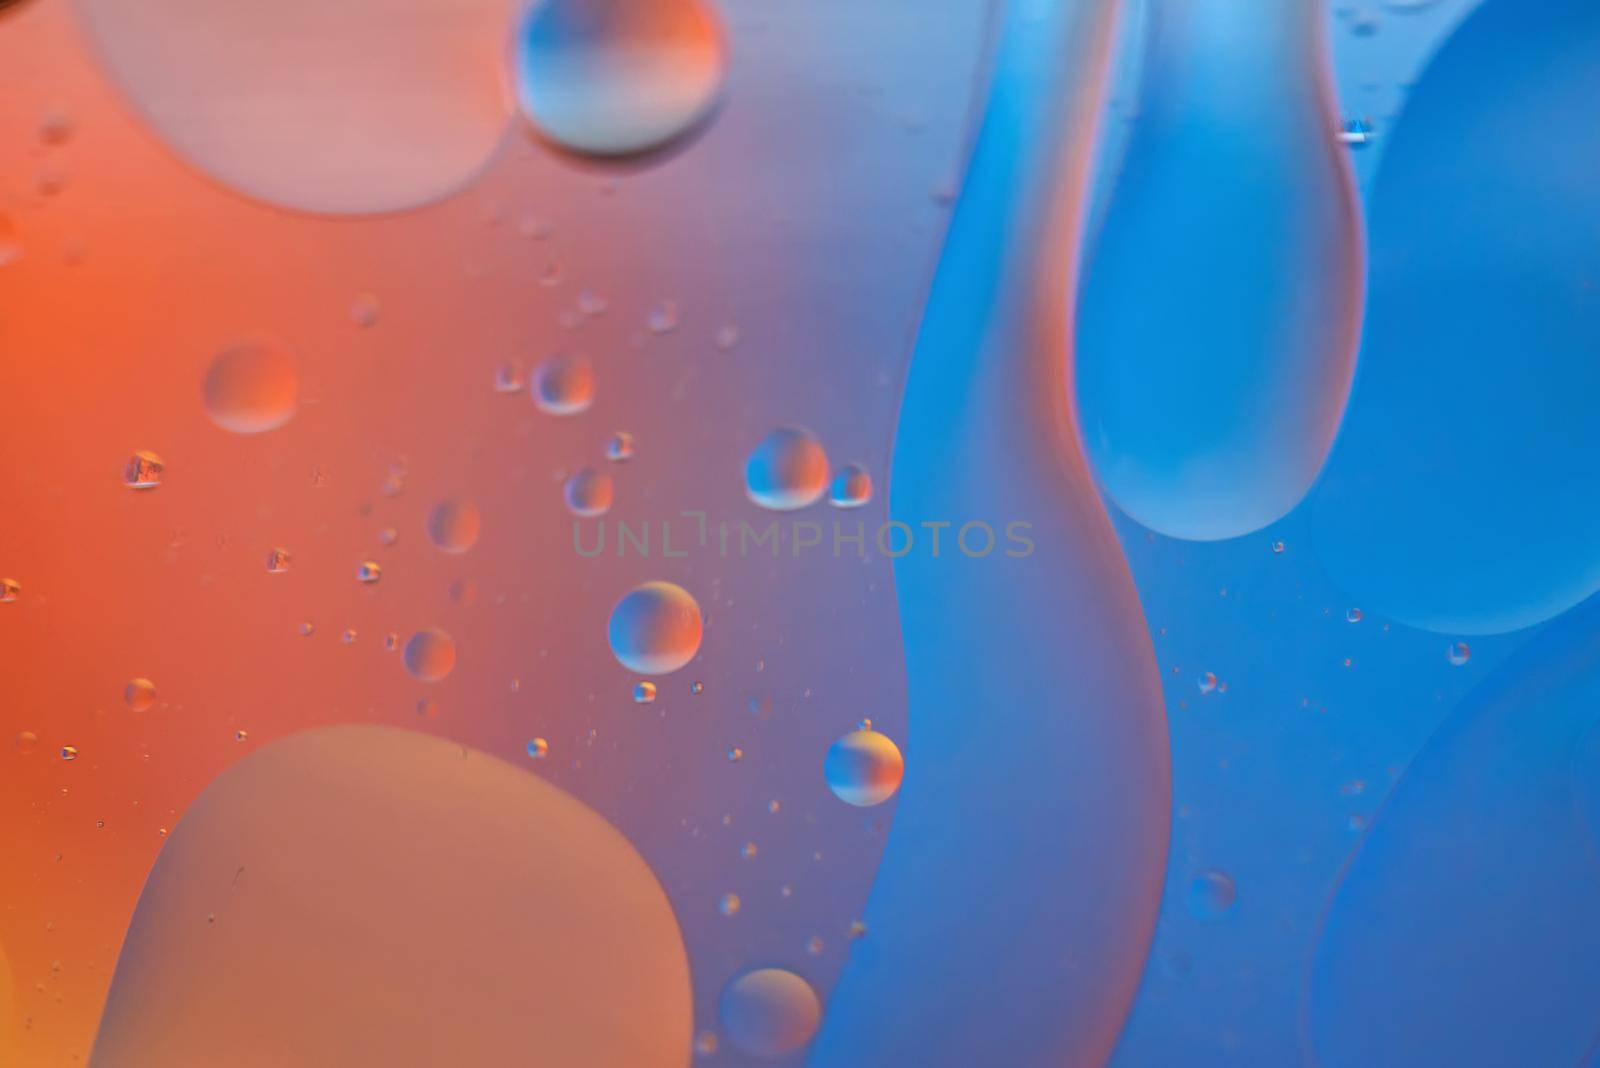 Orange and blue abstract background picture made with oil, water and soap by anytka